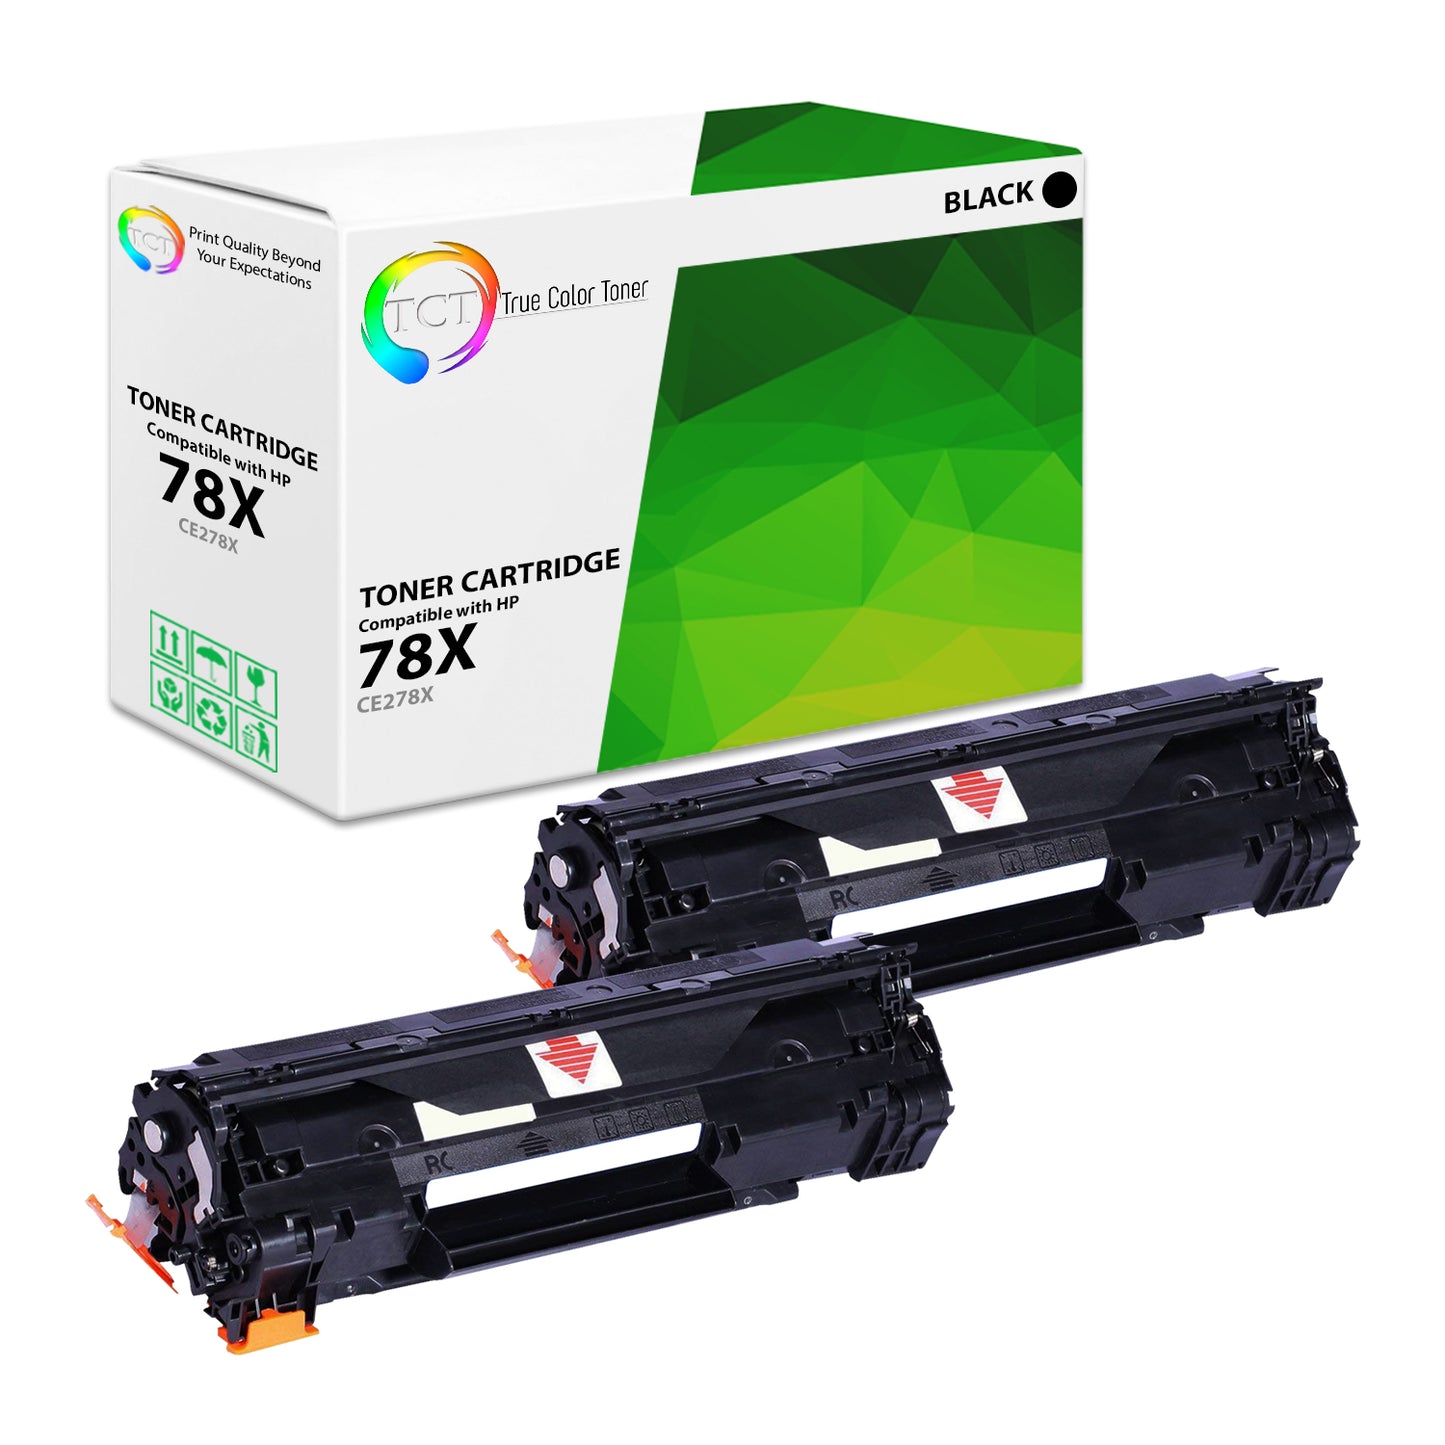 TCT Compatible High Yield Toner Cartridge Replacement for the HP 78X Series - 2 Pack Black